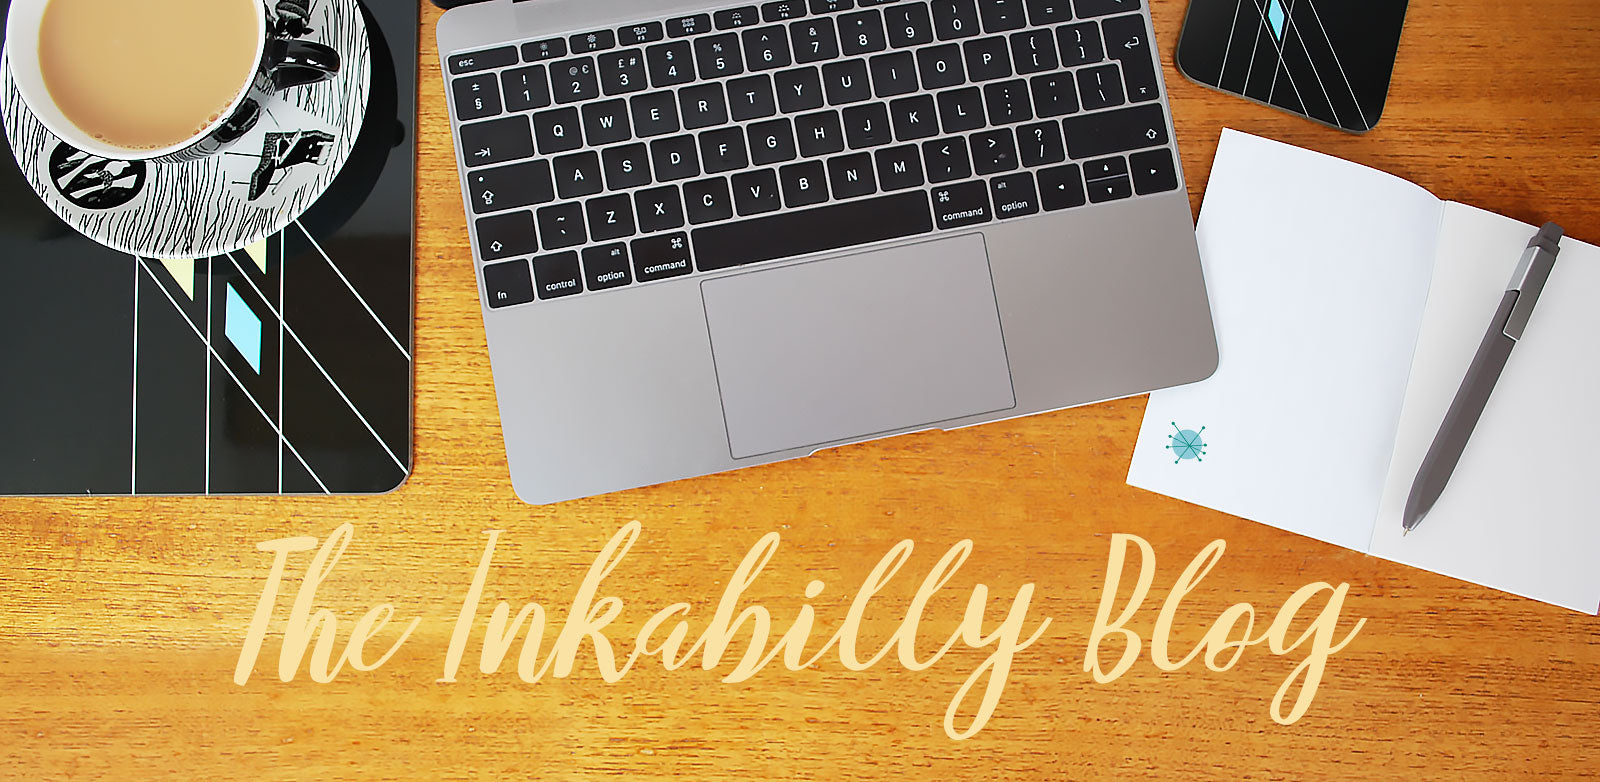 The Inkabilly Blog. Laptop, notebook & pen, vintage tea cup, retro placemat and coaster